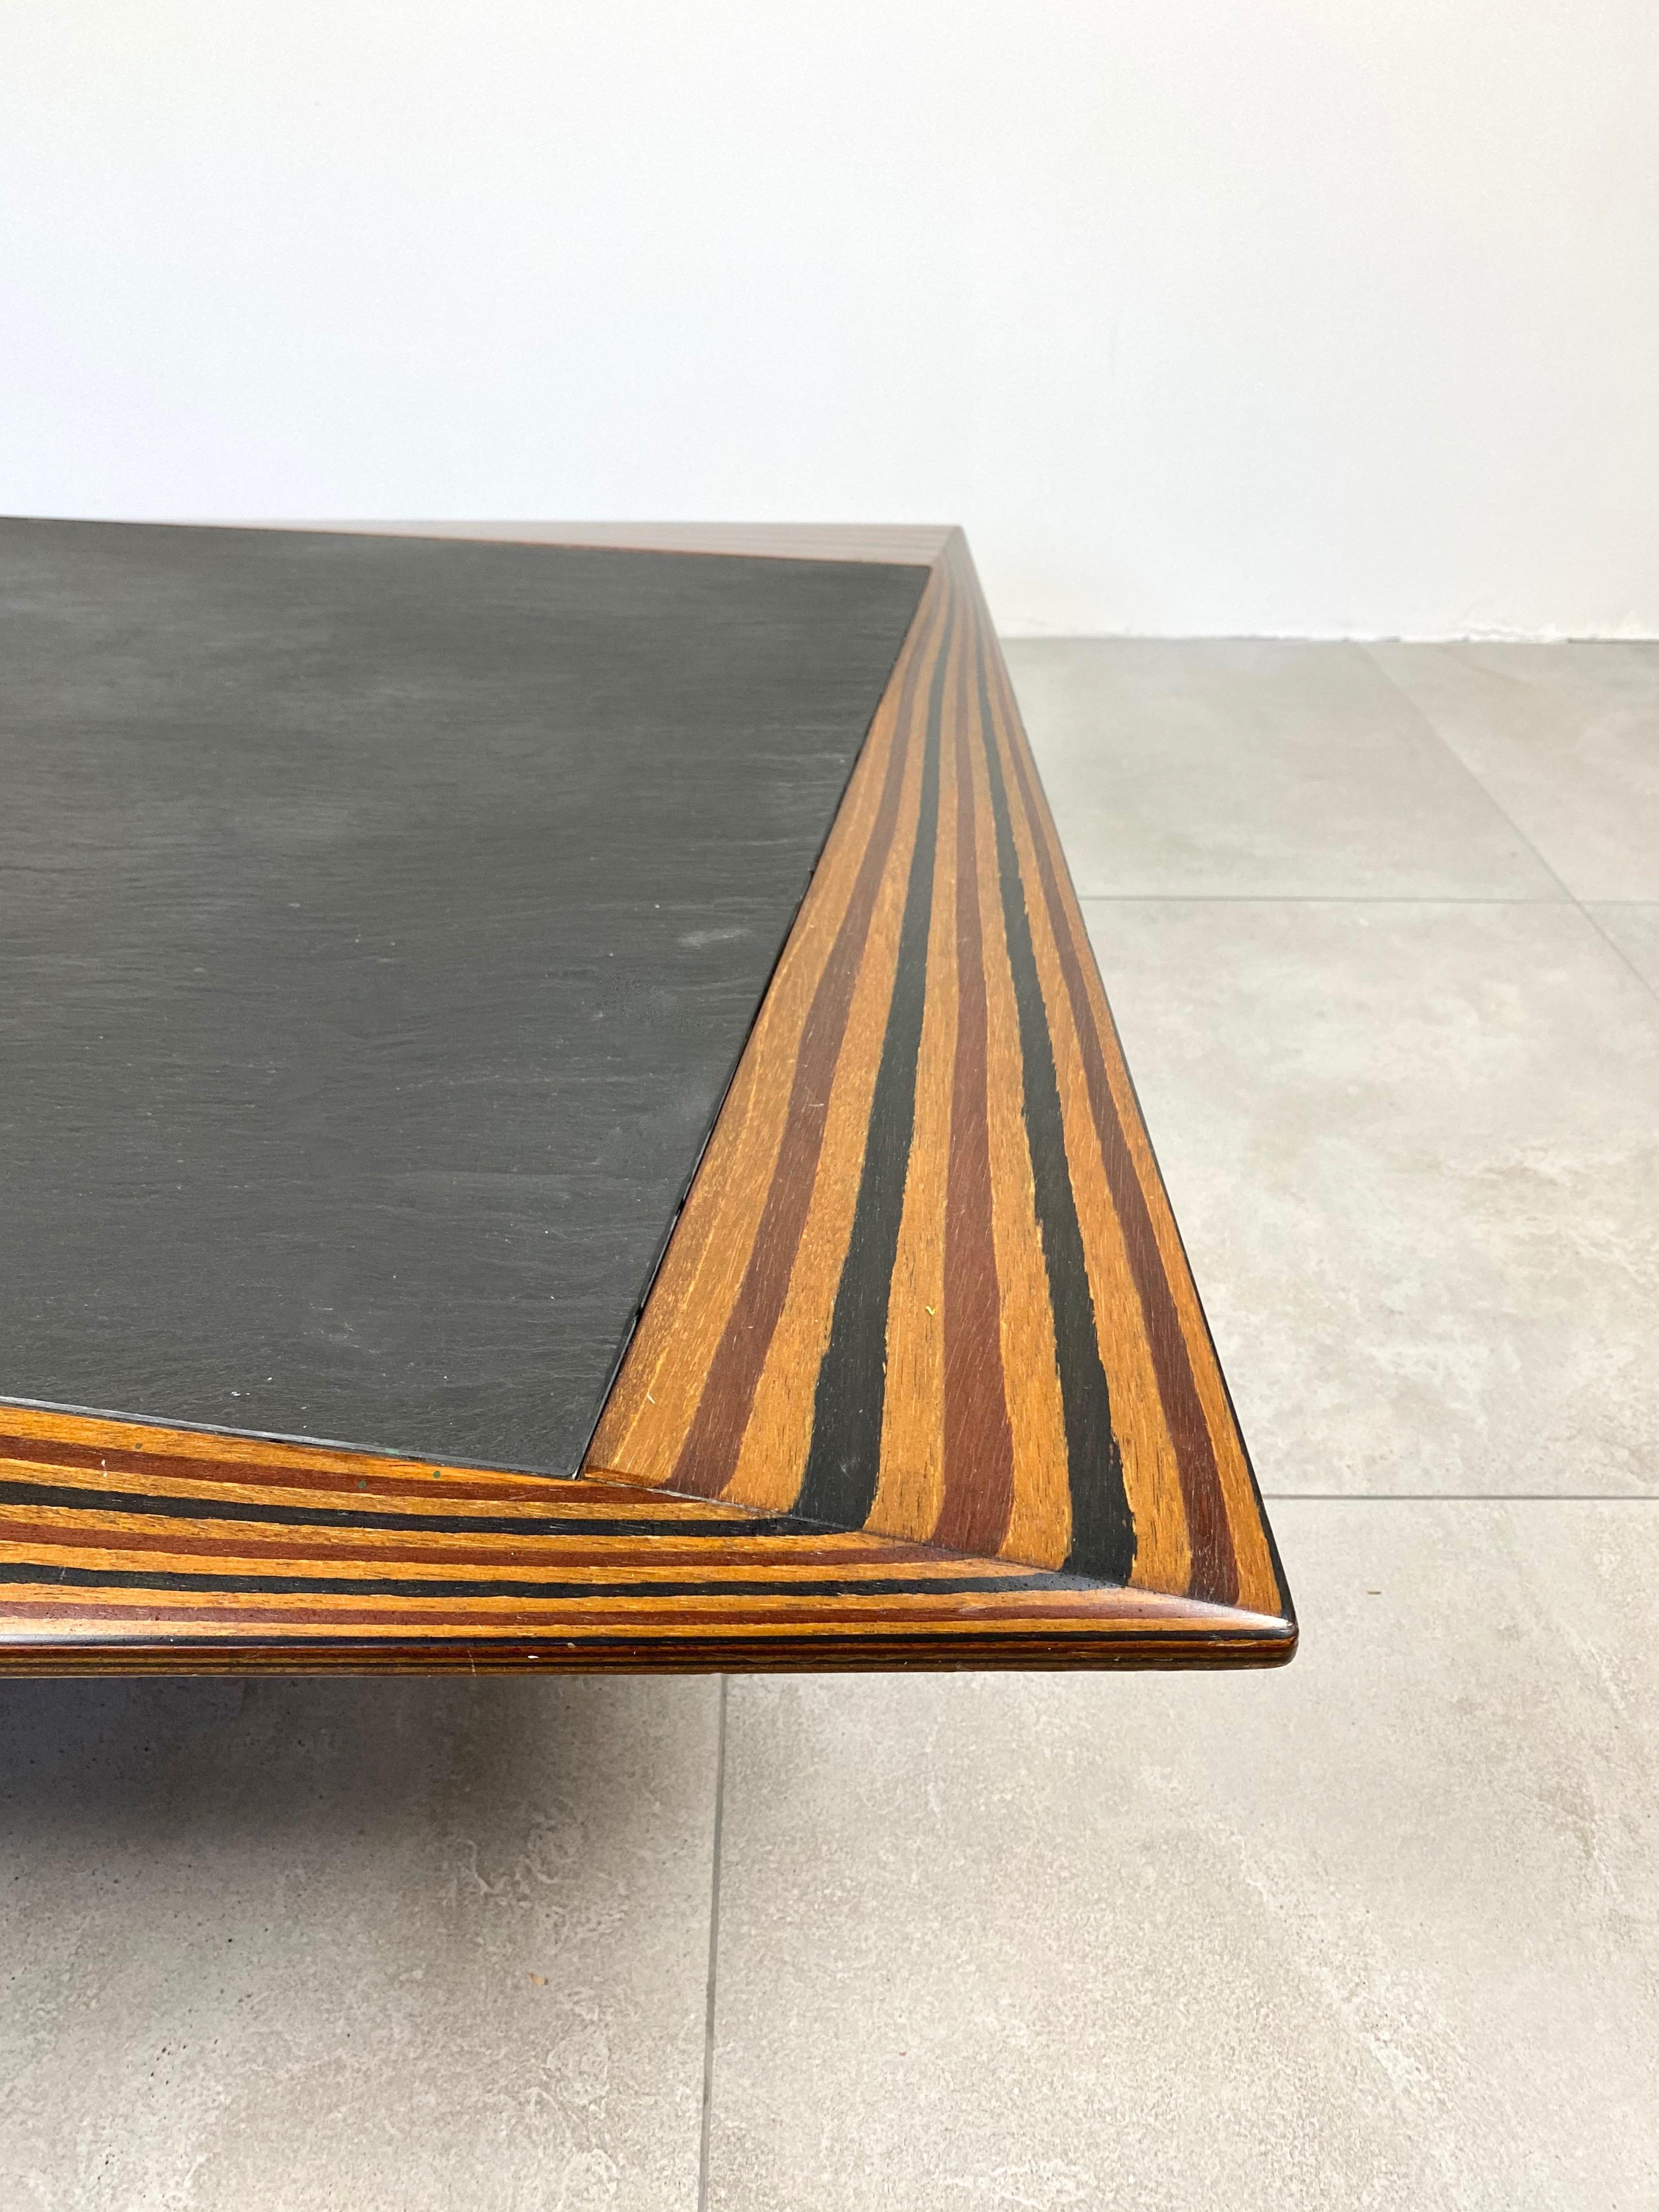 Slate and Wood Coffee Low Table in Tobia Scarpa Style, Italy, 1980s For Sale 3